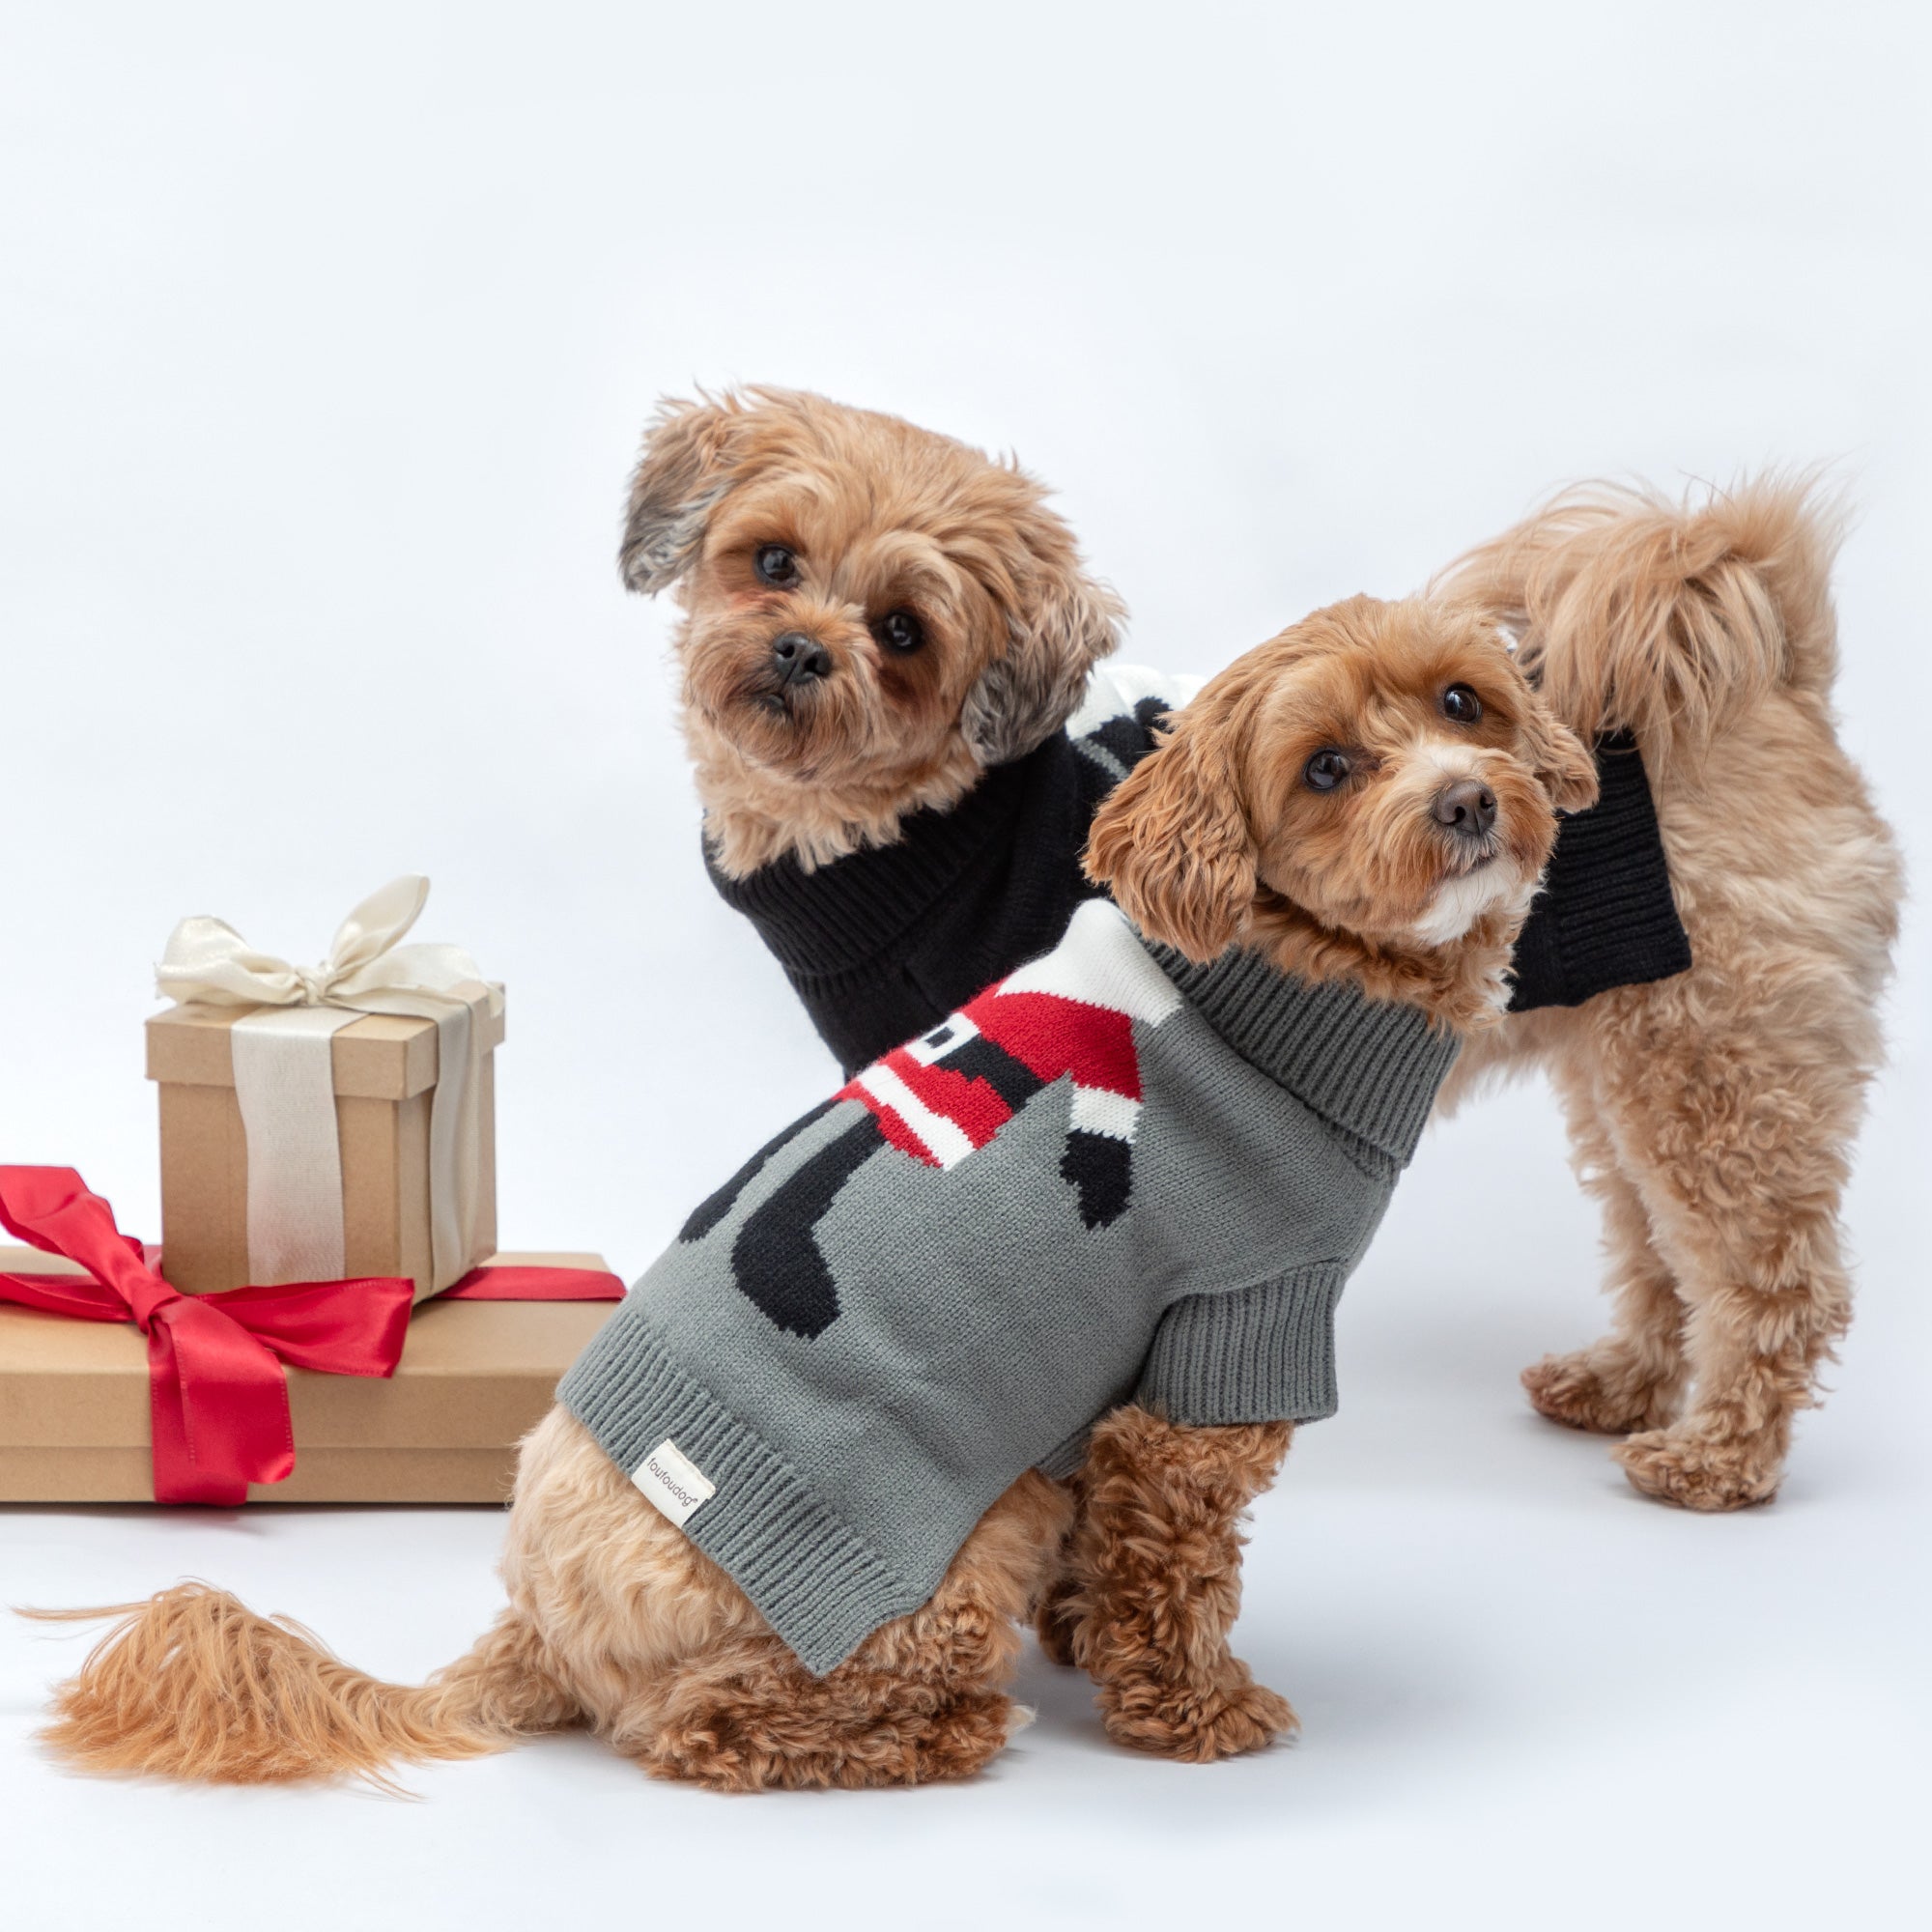 Cozy Christmas Pet Sweater - Gingerbread - L